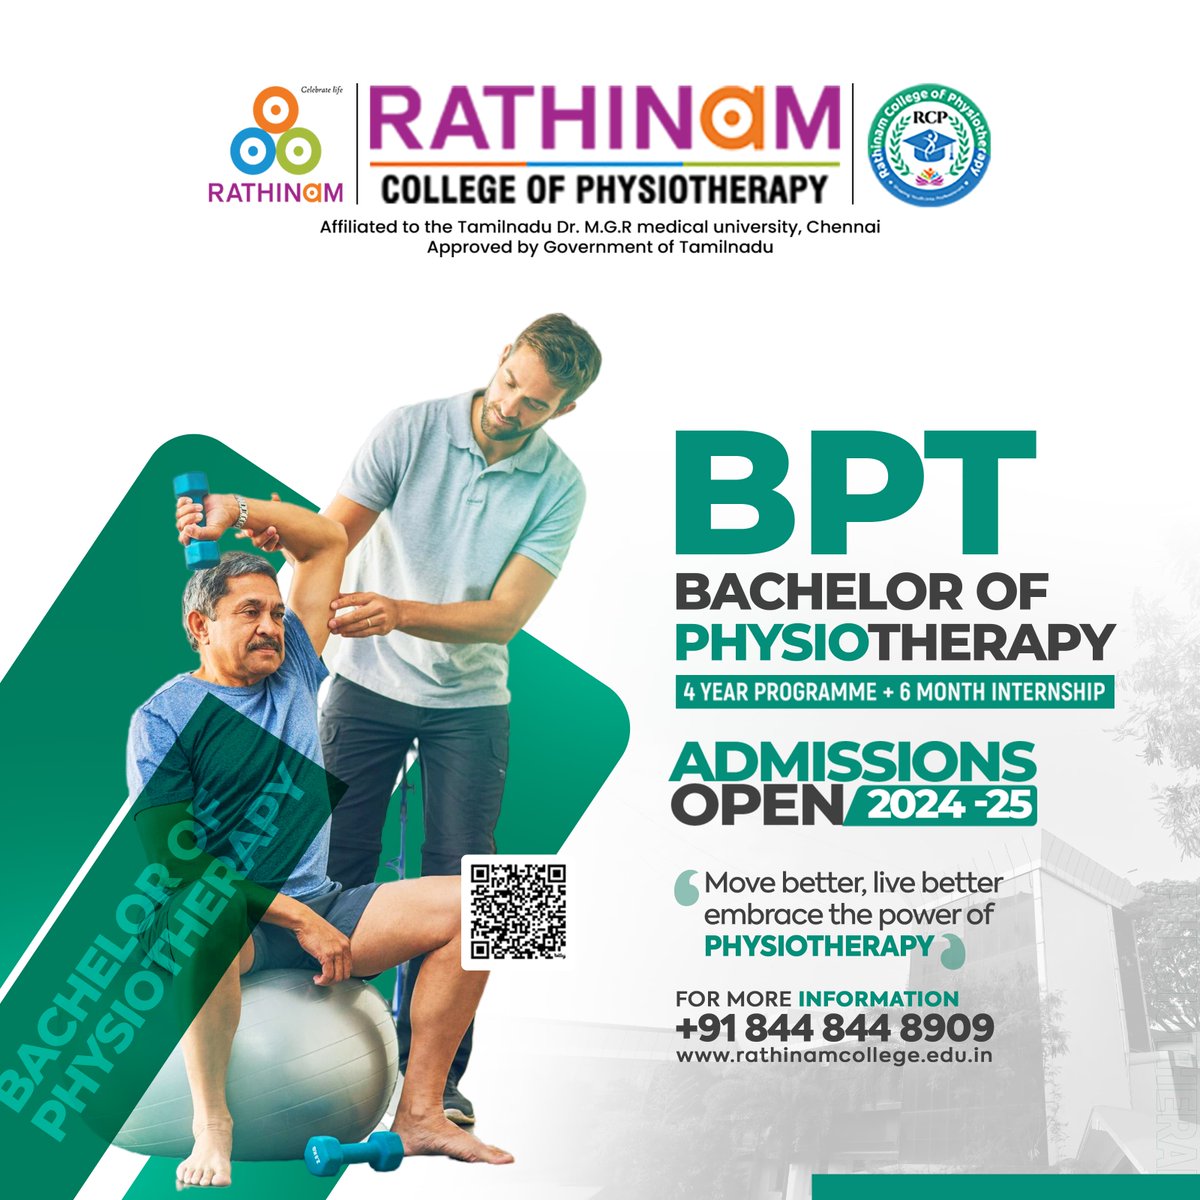 The Rathinam College of Physiotherapy offers a four-year BPT program that will equip you with the knowledge and skills to help people improve their movement and manage pain.

#Physiotherapy #BPT #AdmissionsOpen #MoveBetterLiveBetter #Healthcare #Careers #India #Coimbatore